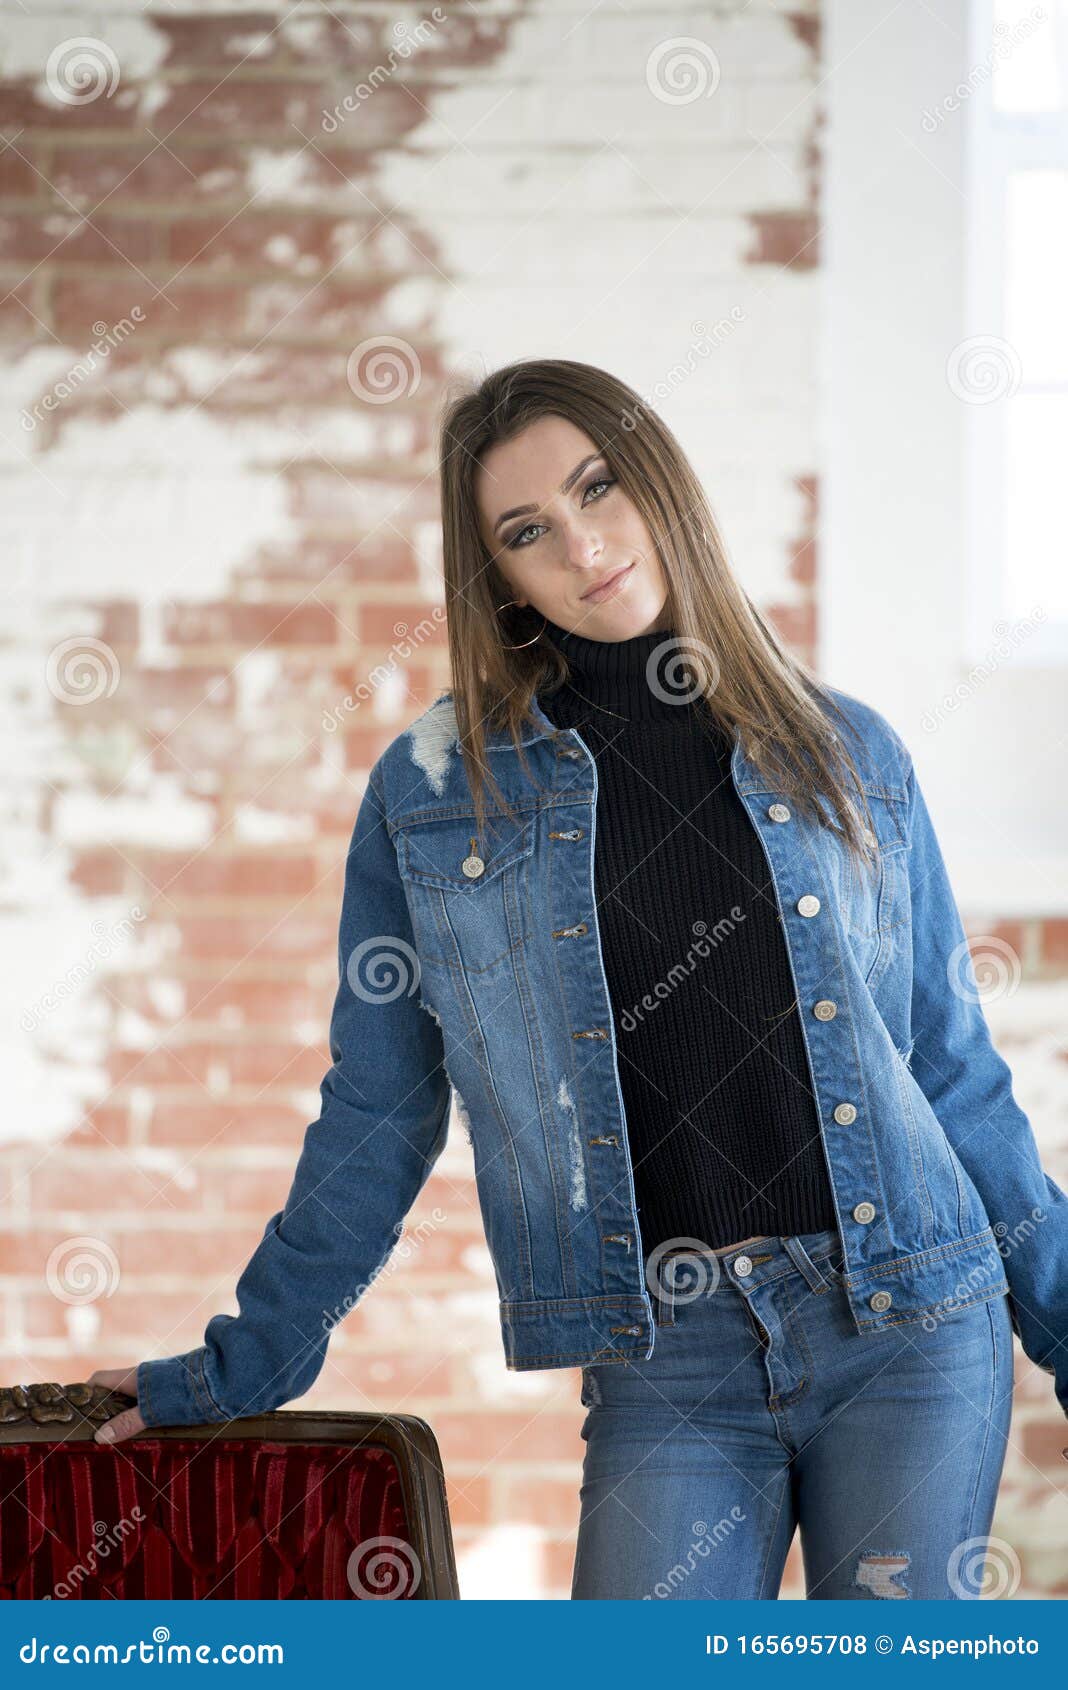 736,532 Beautiful Girls Jeans Royalty-Free Images, Stock Photos & Pictures  | Shutterstock